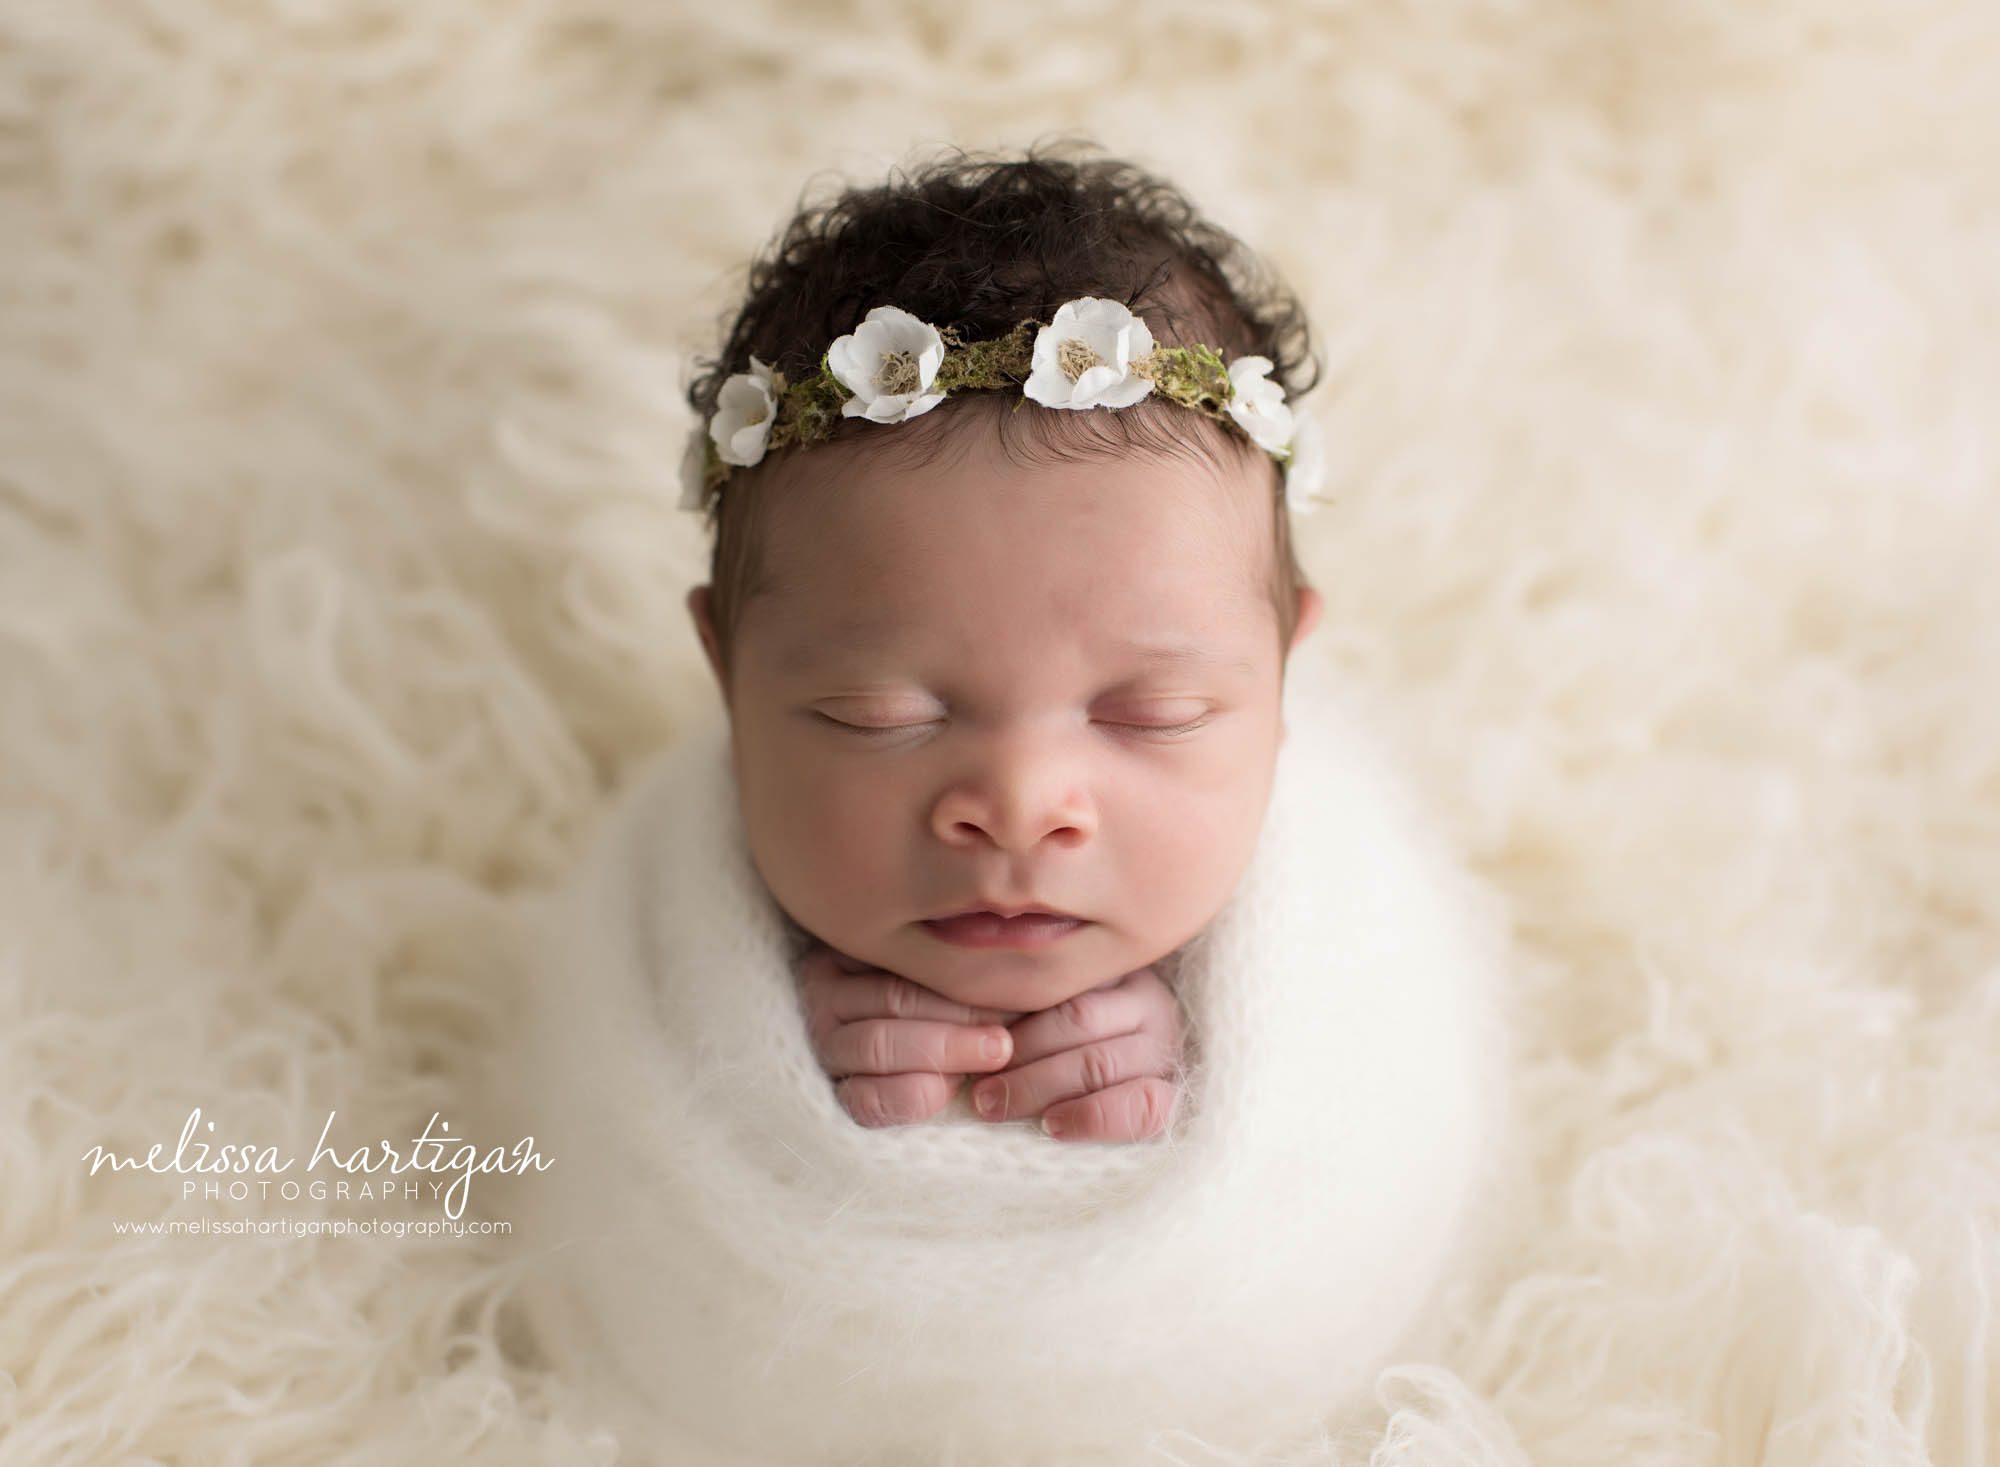 baby girl wrapped potato sack pose in knitted cream colored wrap with cream white flower headband